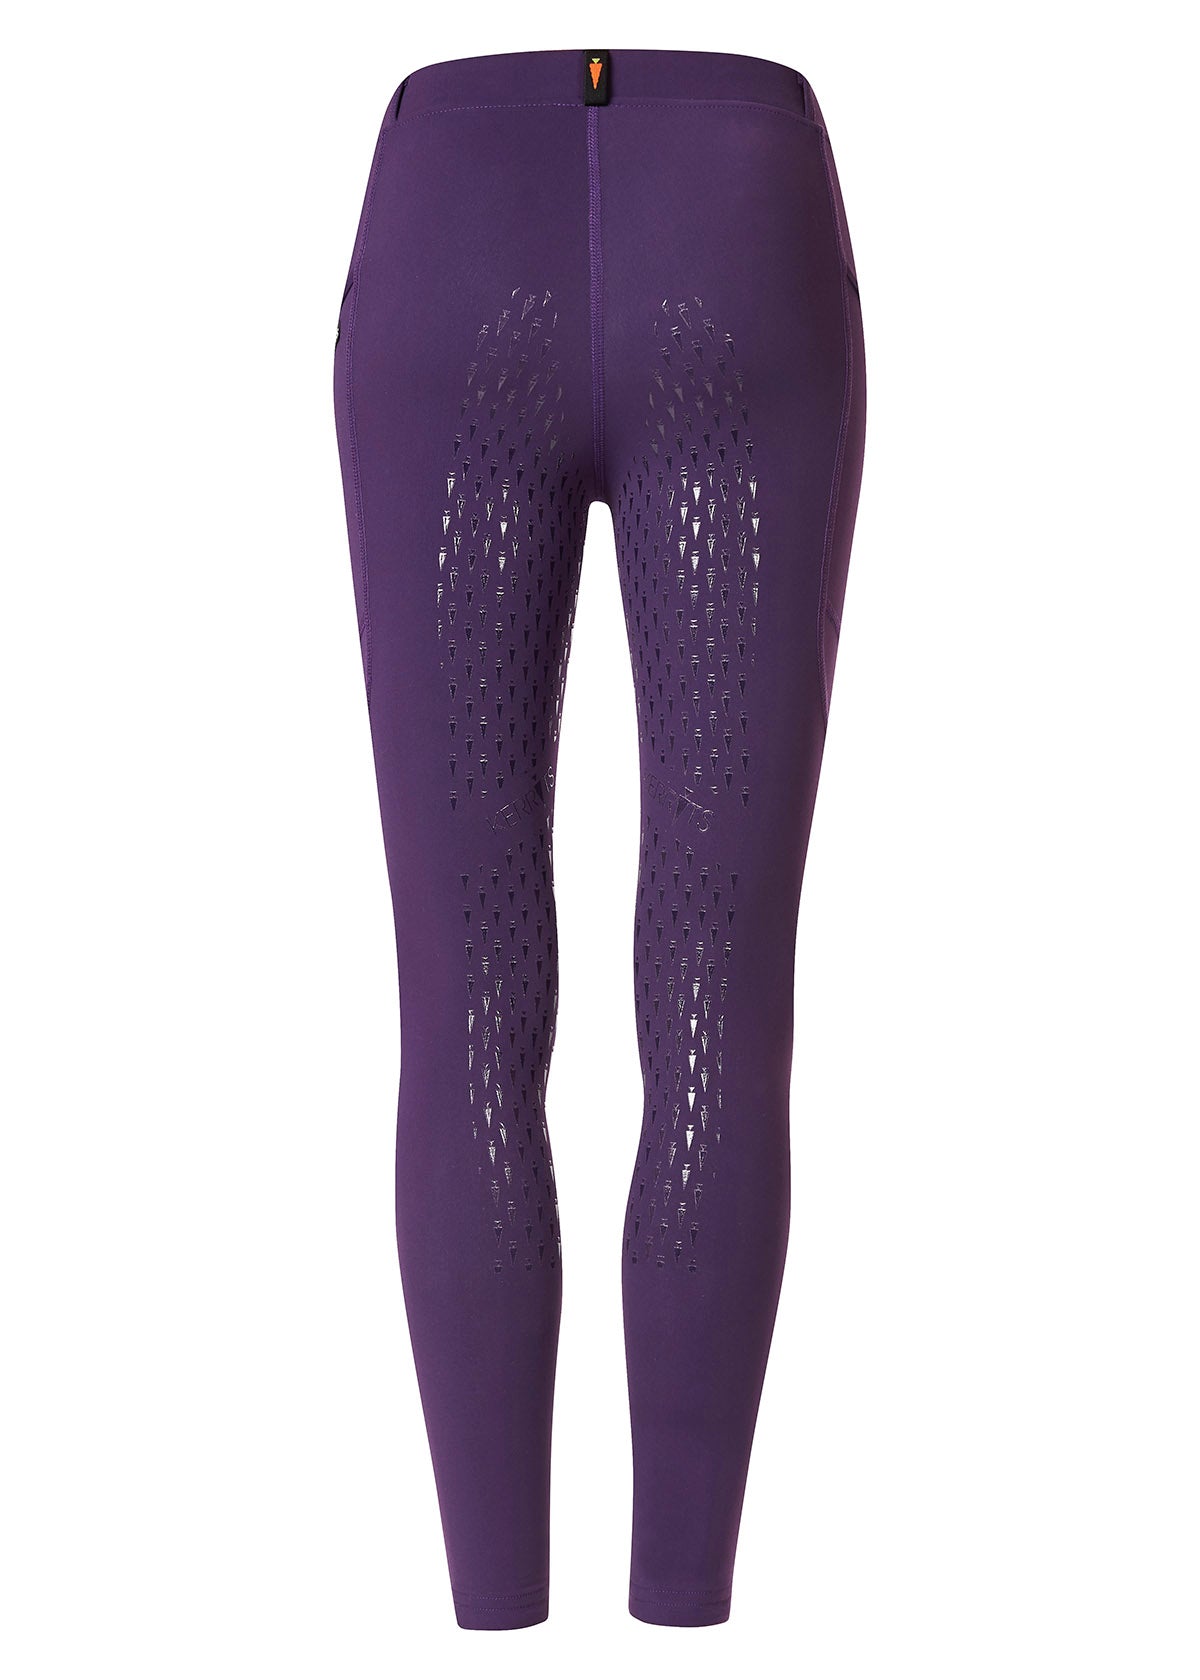 Icecold Tights - Active Ride Shop